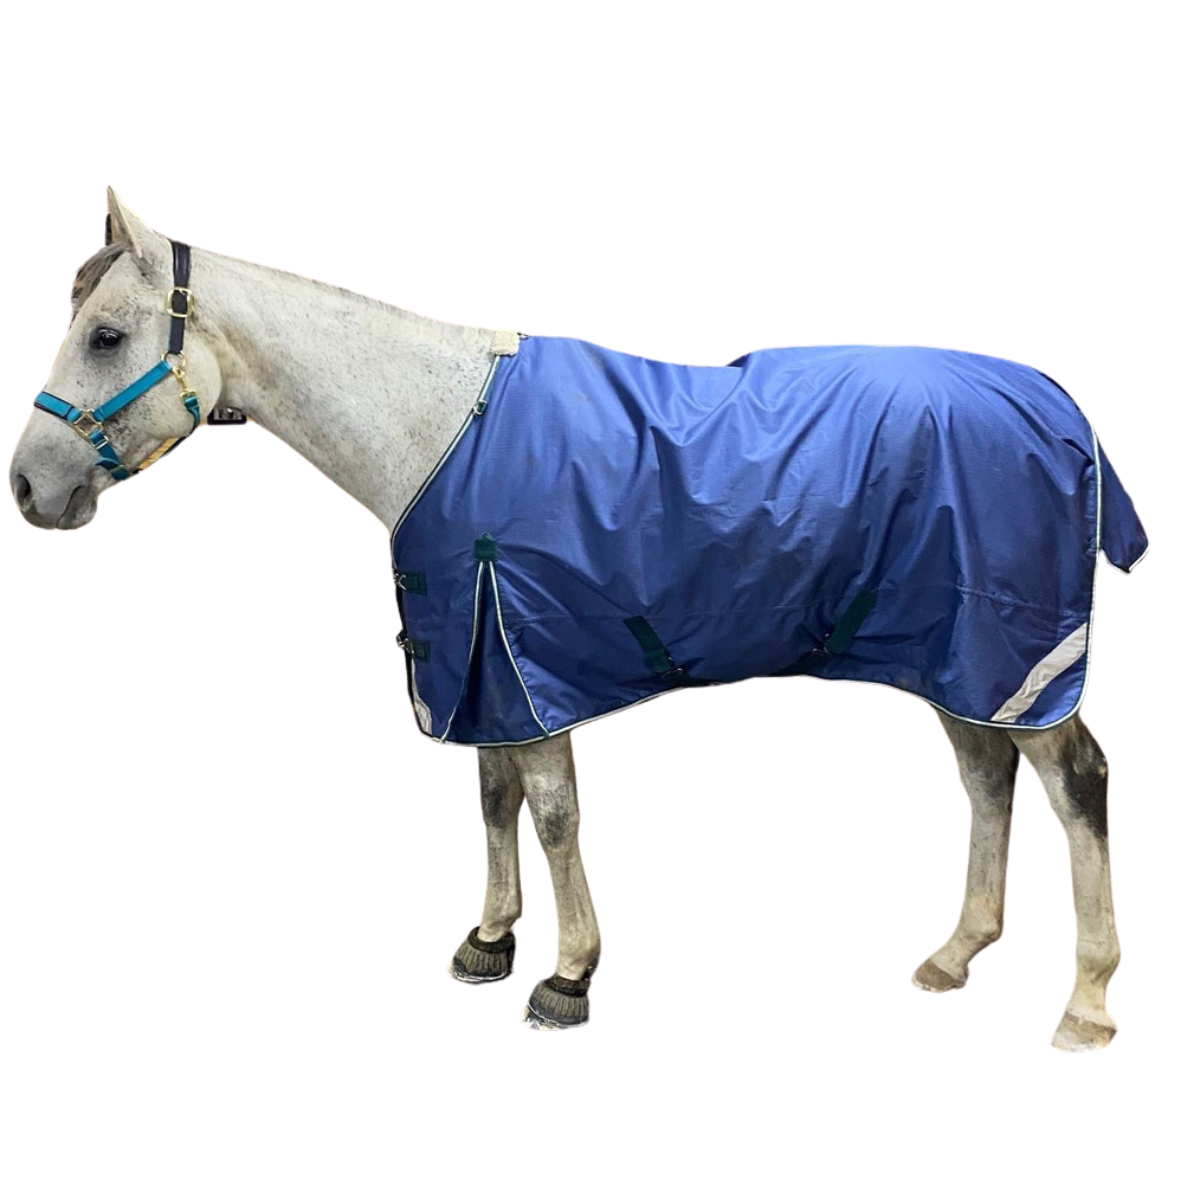 Pro-Trainer Turnout Blanket with Detachable Neck Cover, 1200D - Navy